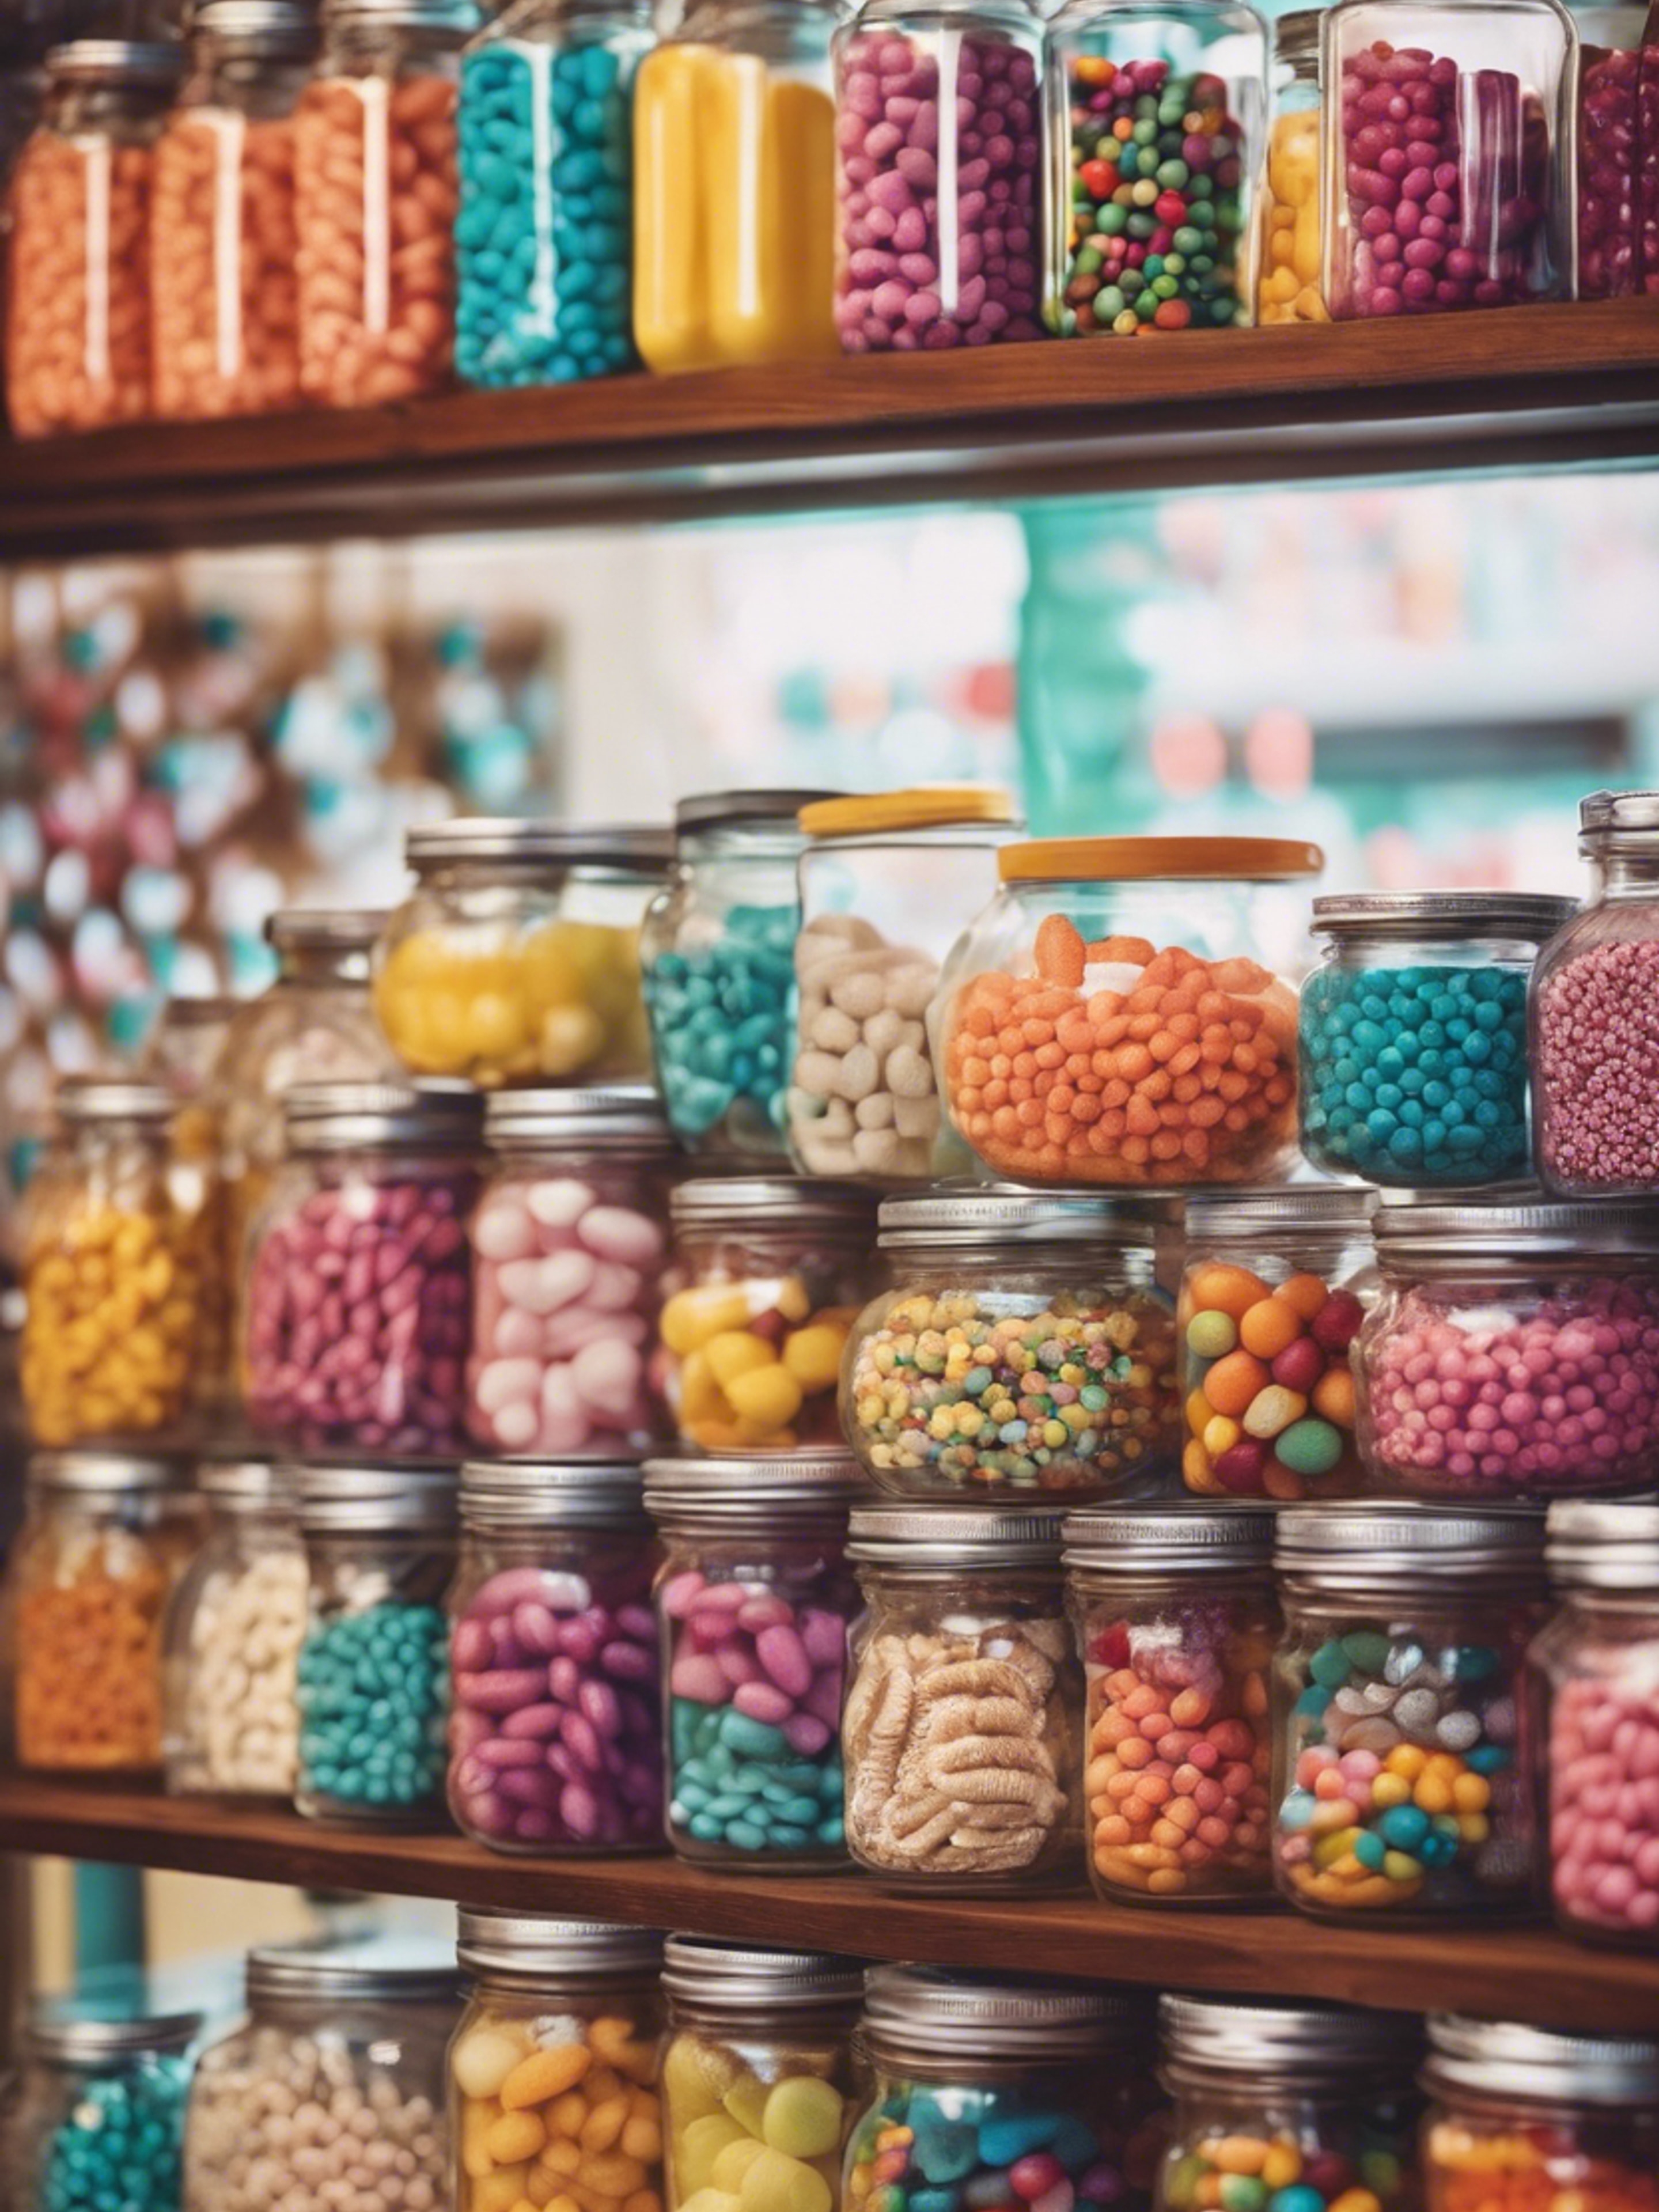 Retro candy store filled with jars of colorful treats. ورق الجدران[53bdbe1ef5c6451abca1]